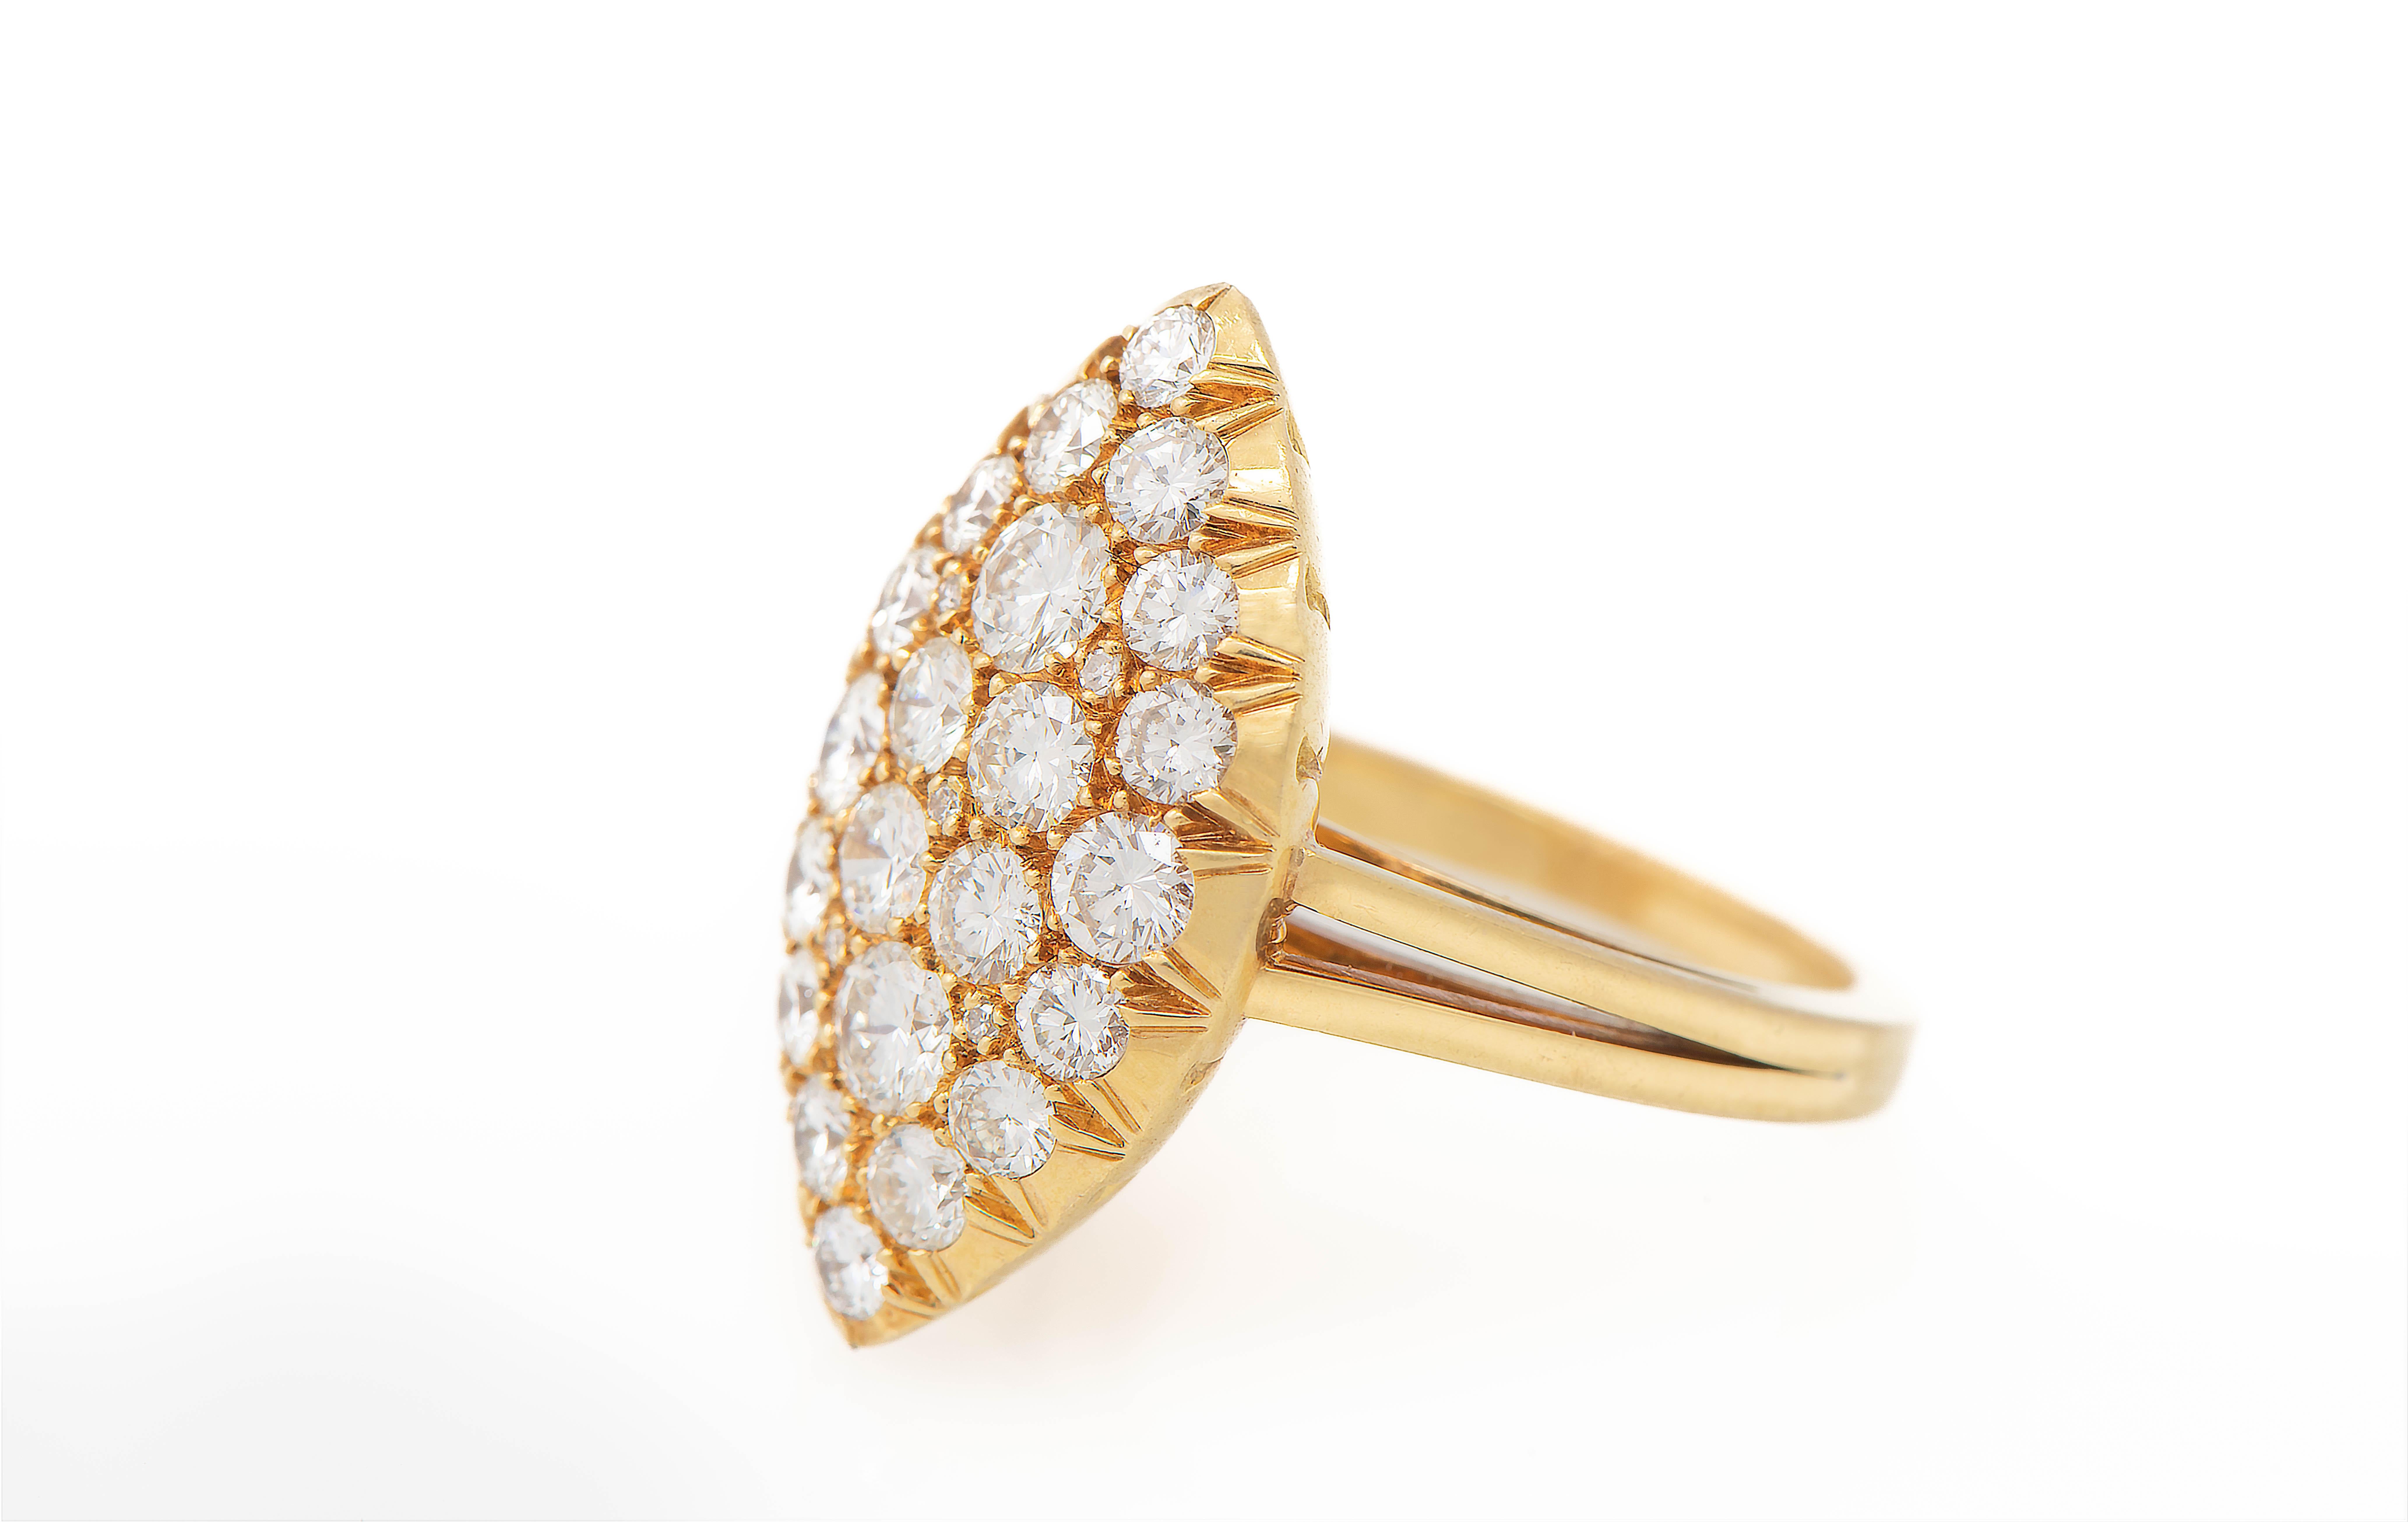 Diamond Navette Ring

27 round cut diamonds set in 18k yellow gold.

Total approximate diamond weight: 2.5 ct

Ring Size: 5.75
Resizable free of charge